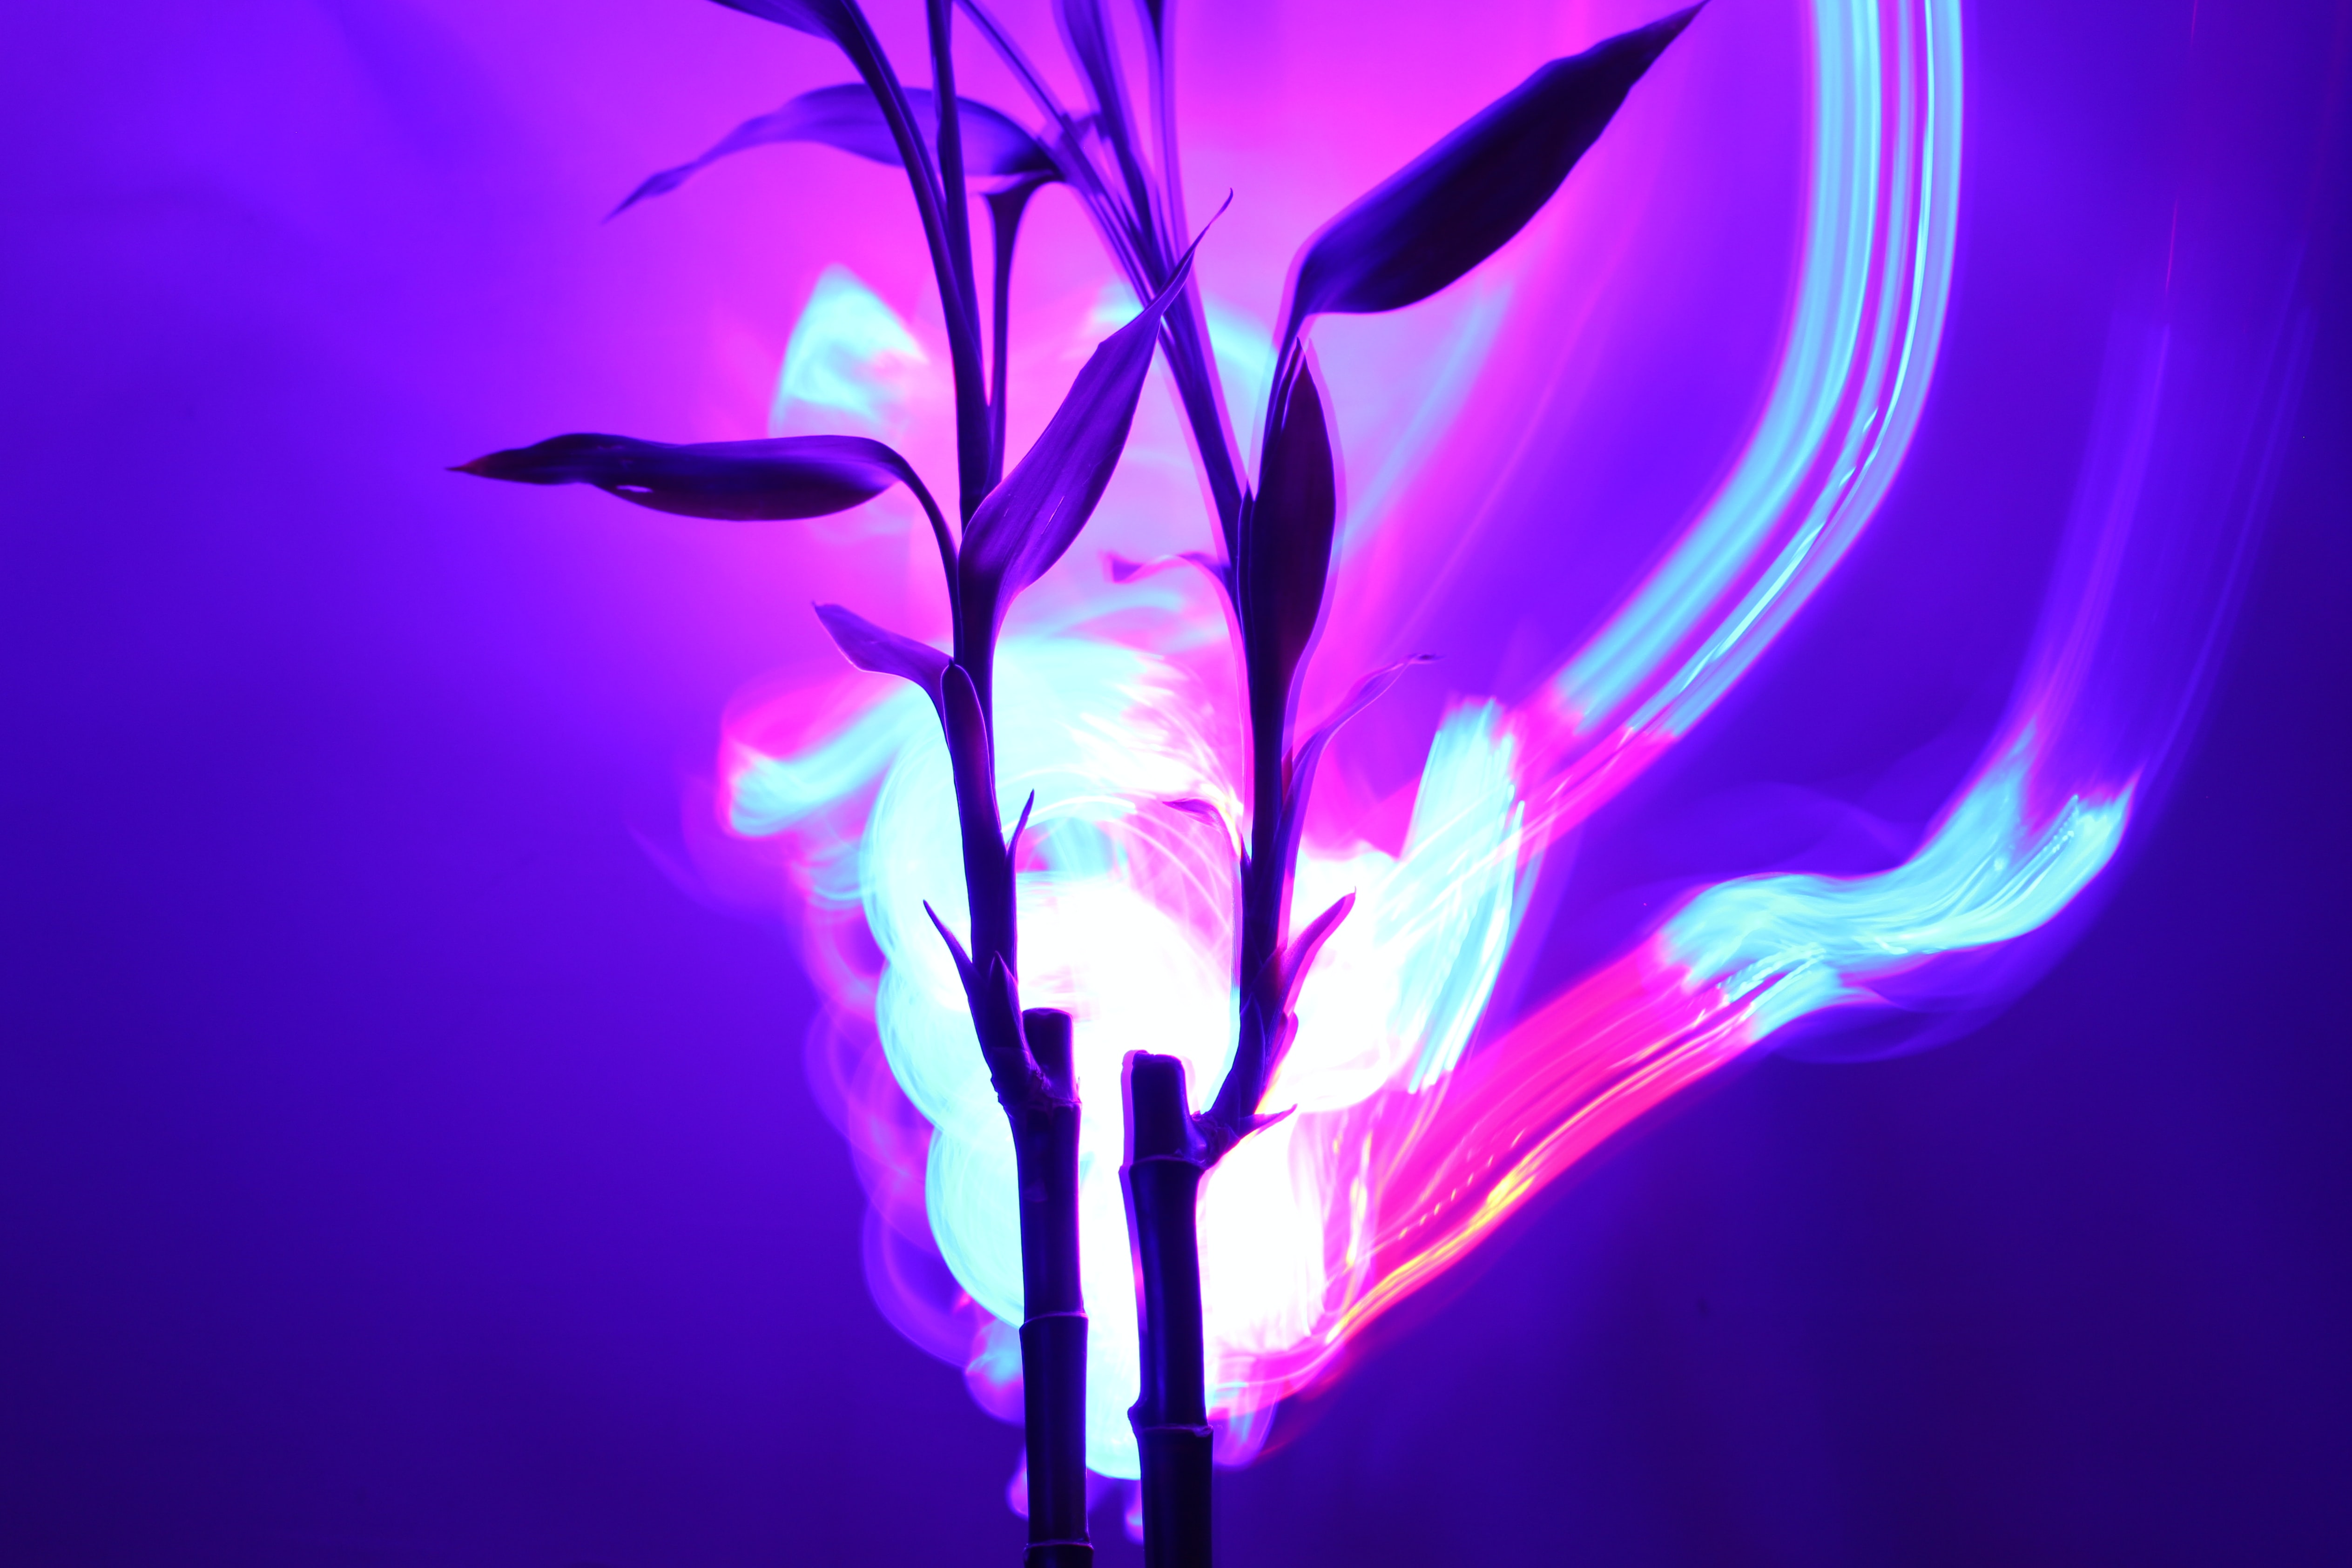 Leafy plant in front of neon lights